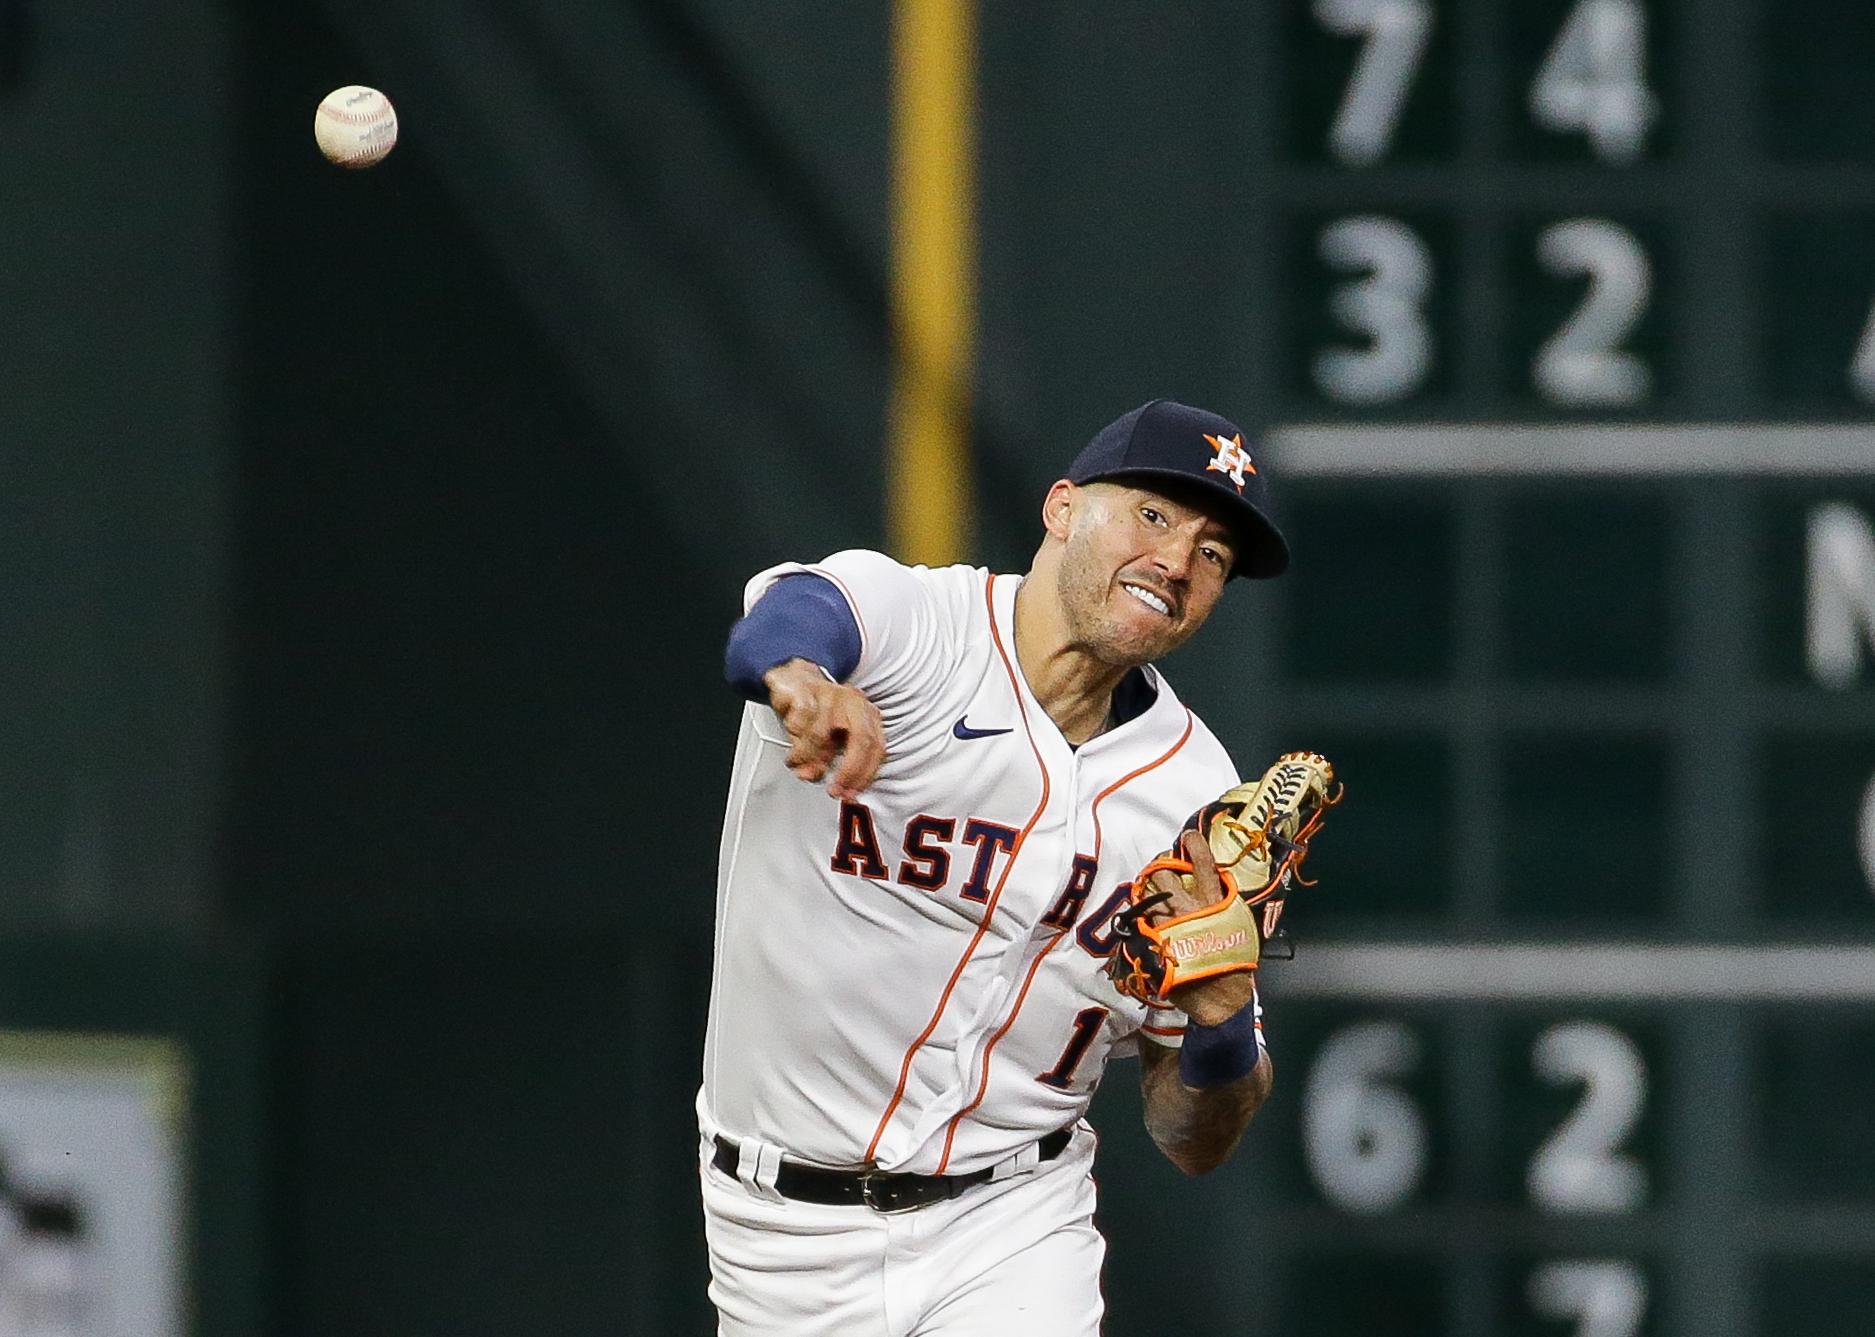 Cannonball coming! The arm that makes Carlos Correa a special